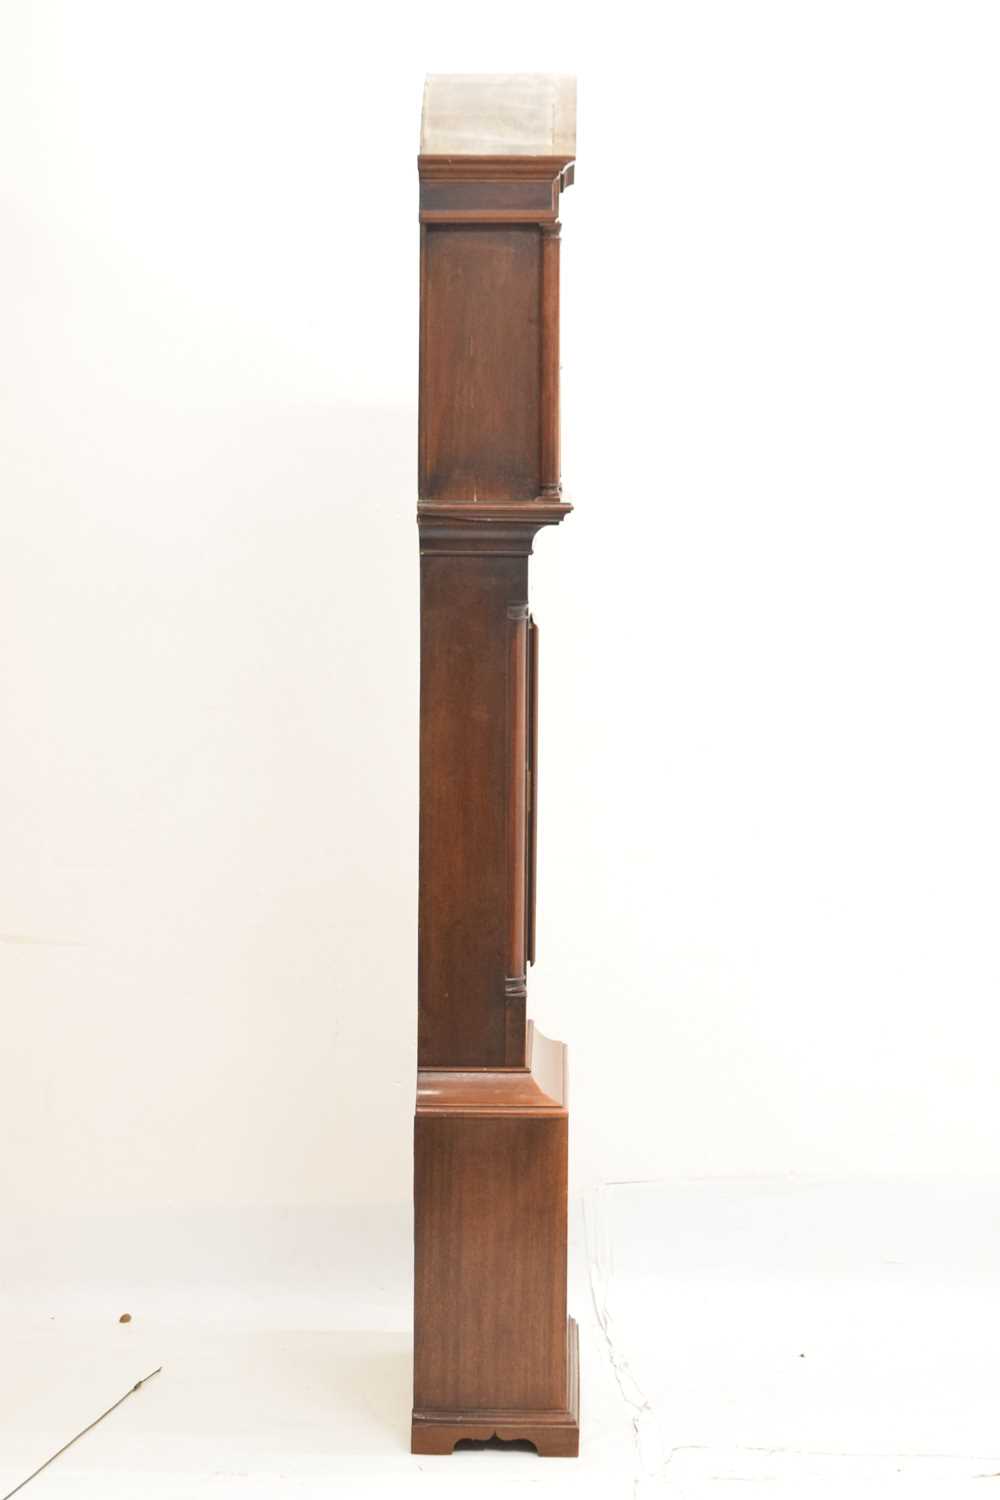 19th century mahogany longcase clock, A & Wm. Miller, Airdrie - Image 4 of 9